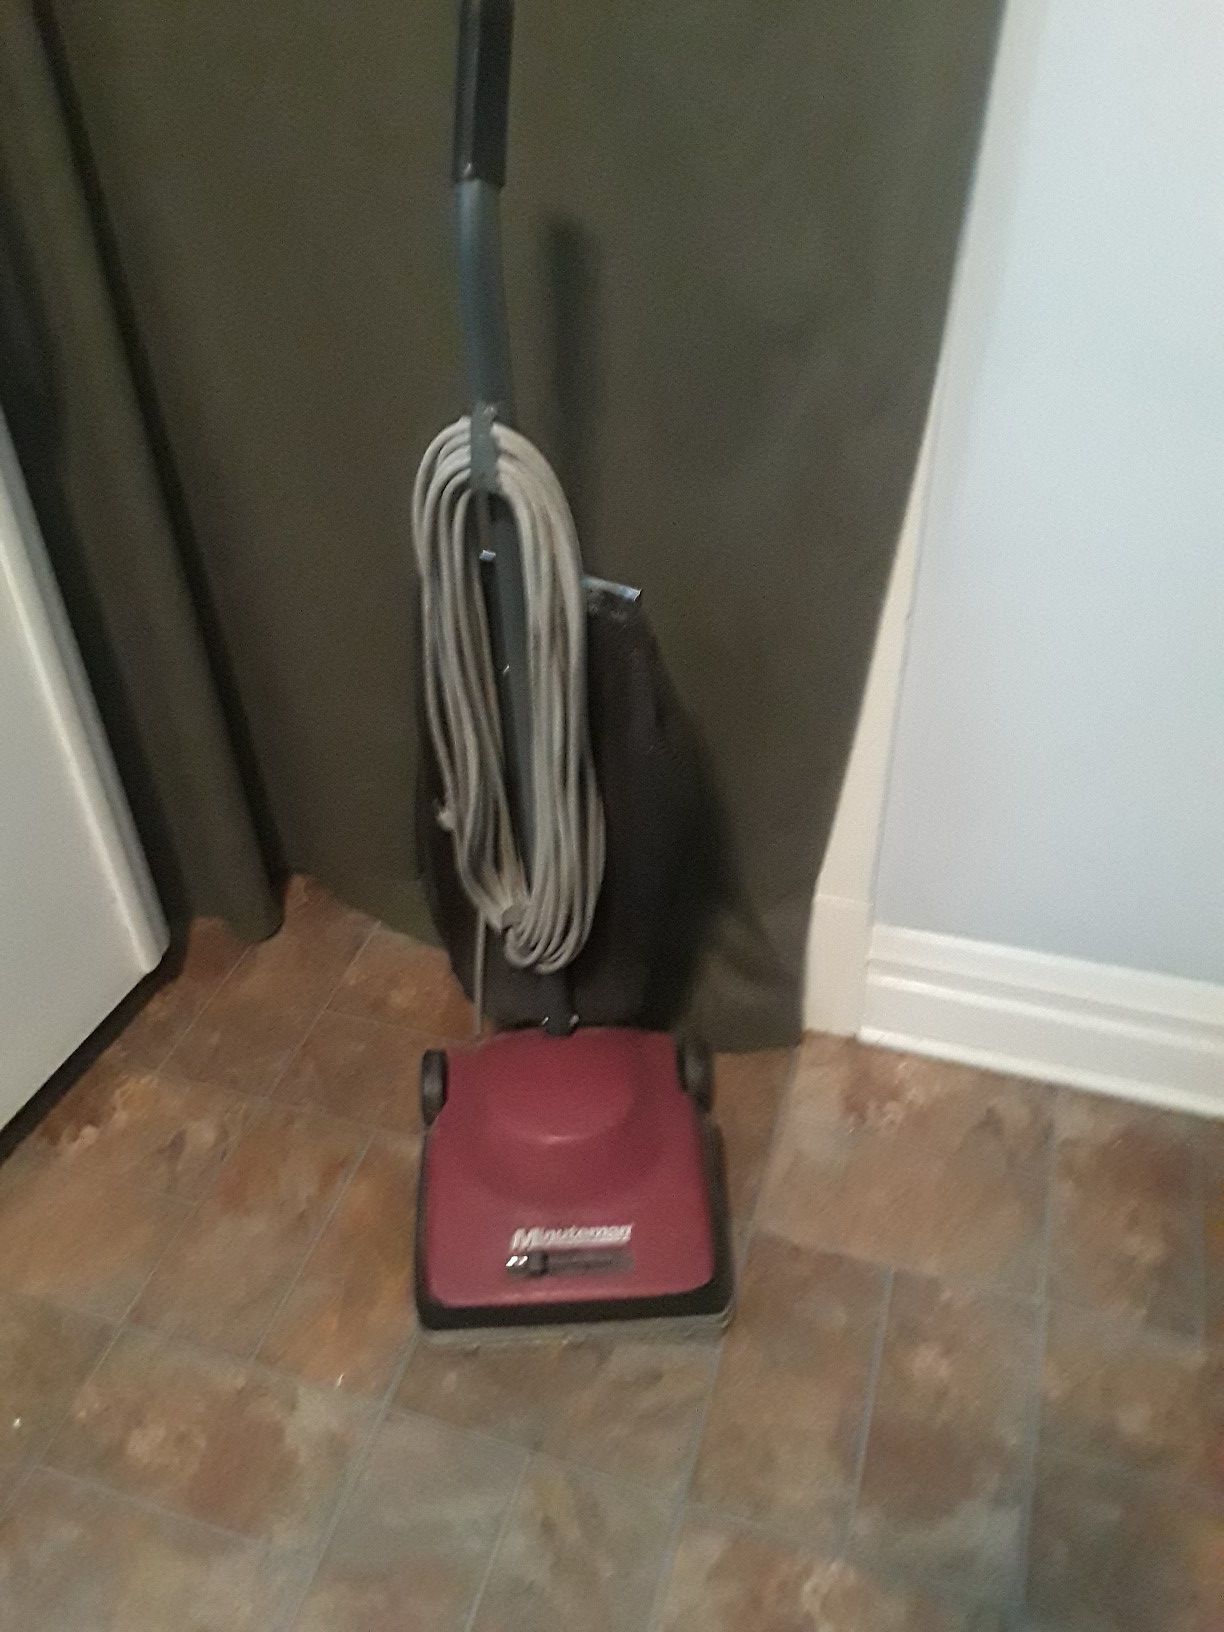 Commercial vacuum - good condition